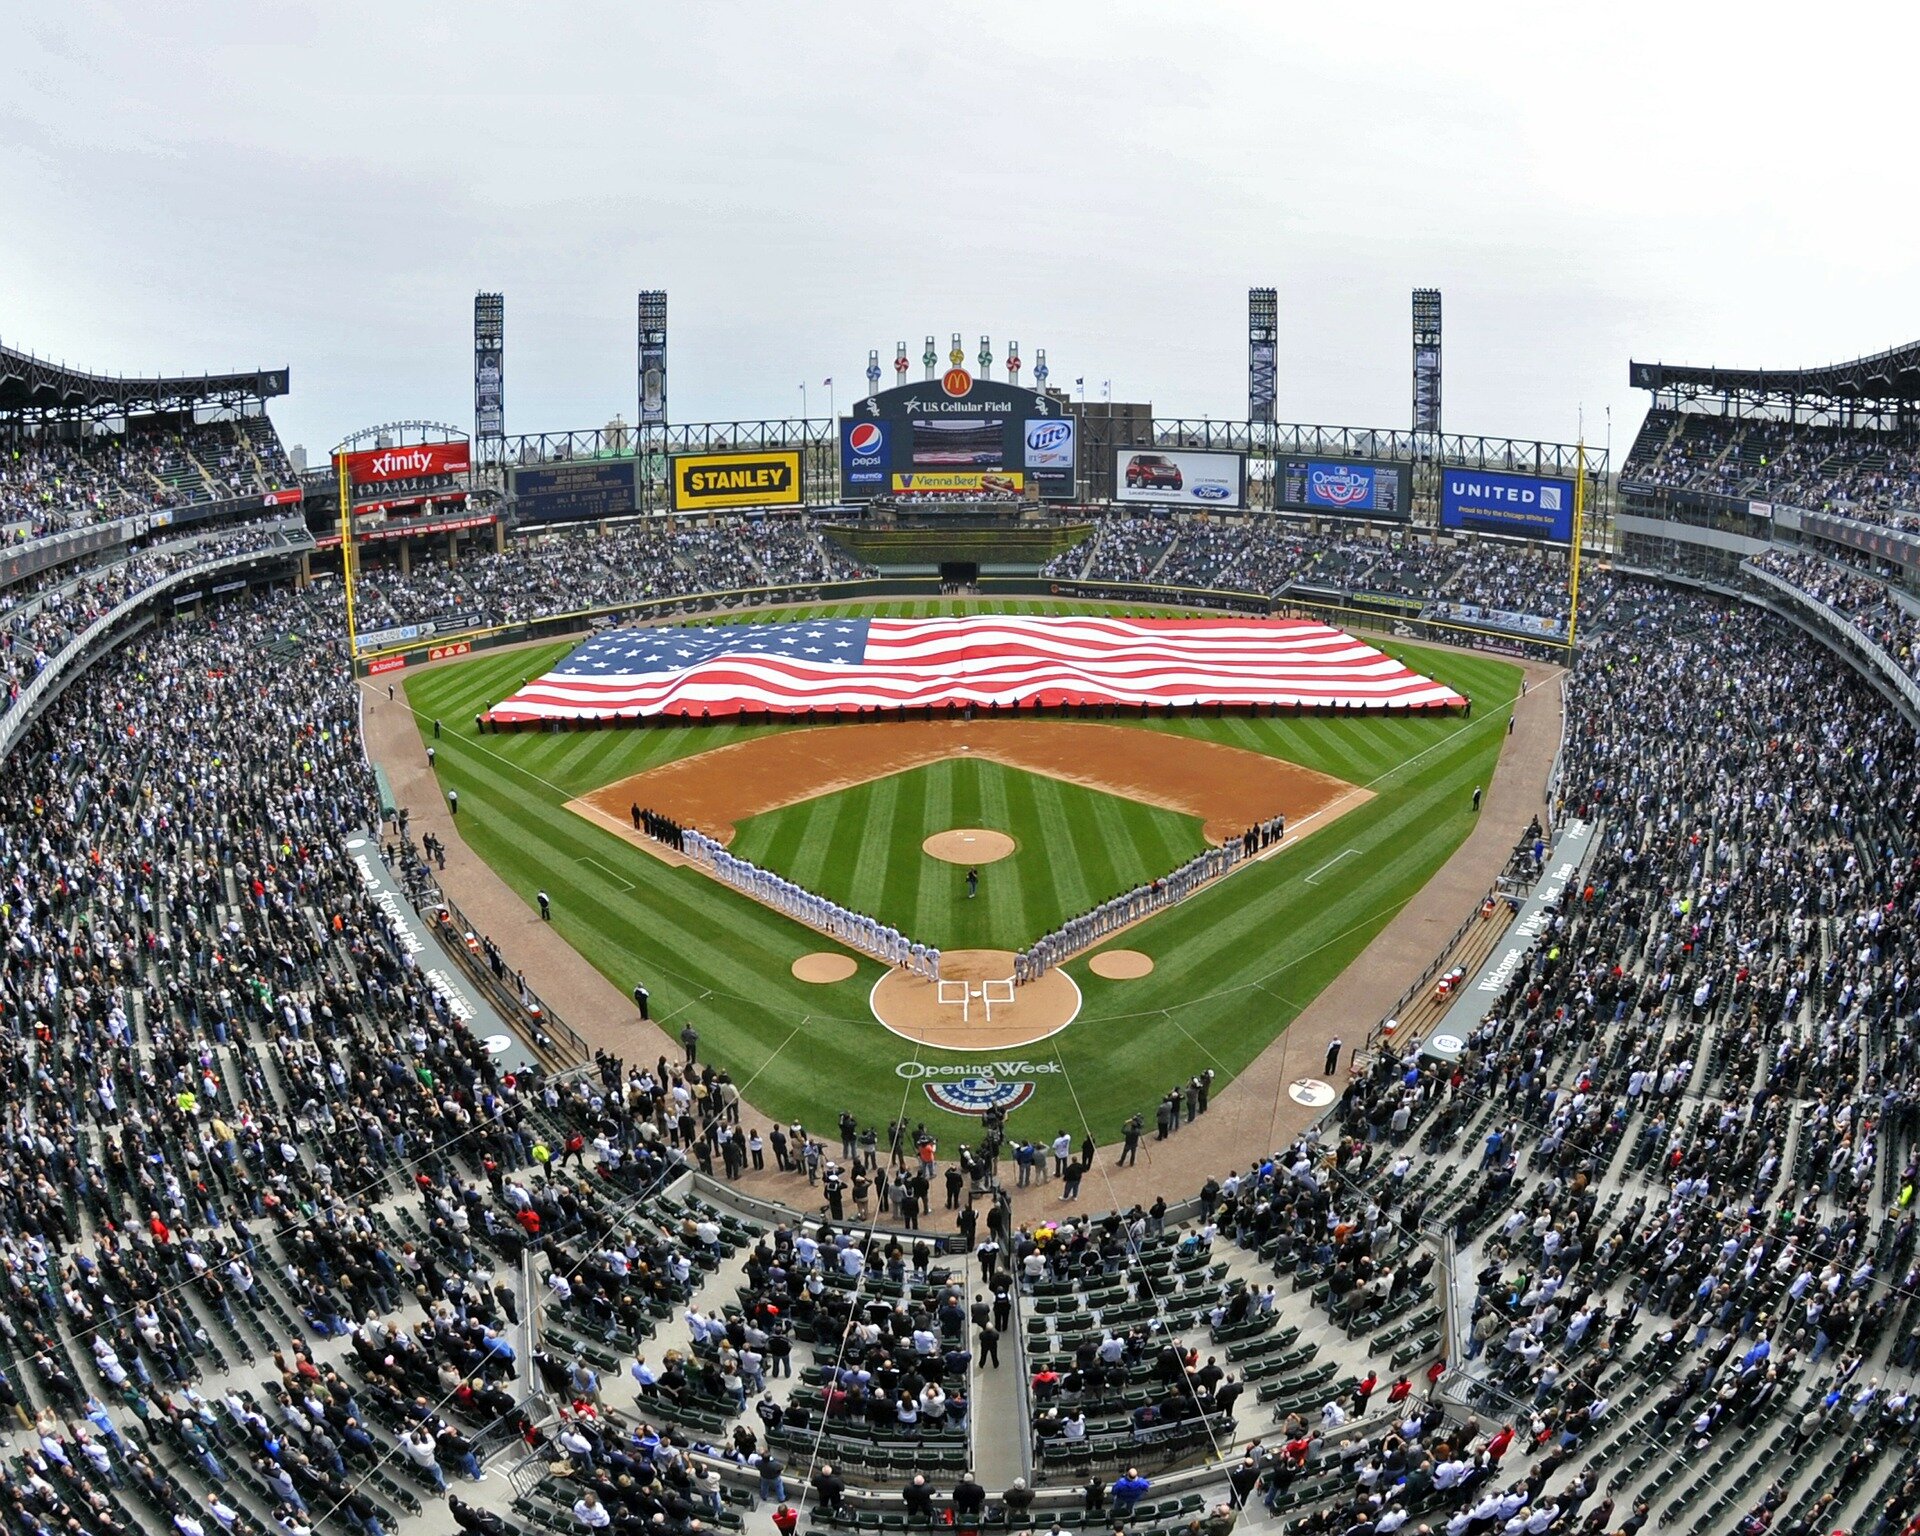 Home of the Chicago White Sox